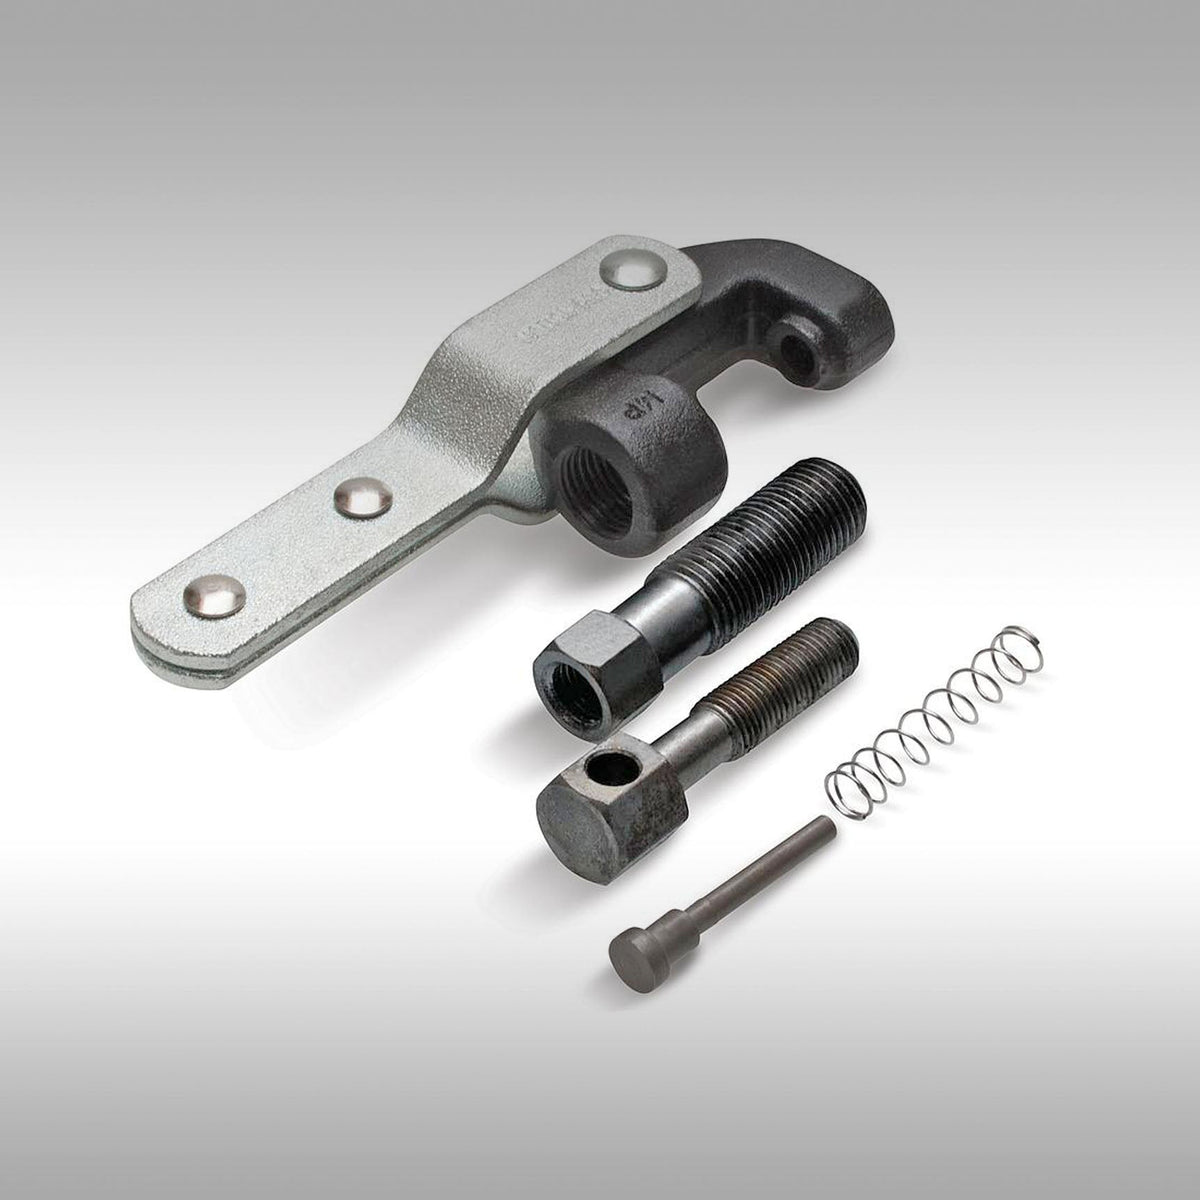 Motion Pro motorcycle chain breaker with folding handle. Perfect for at home motorcycle drivetrain maintenance. 